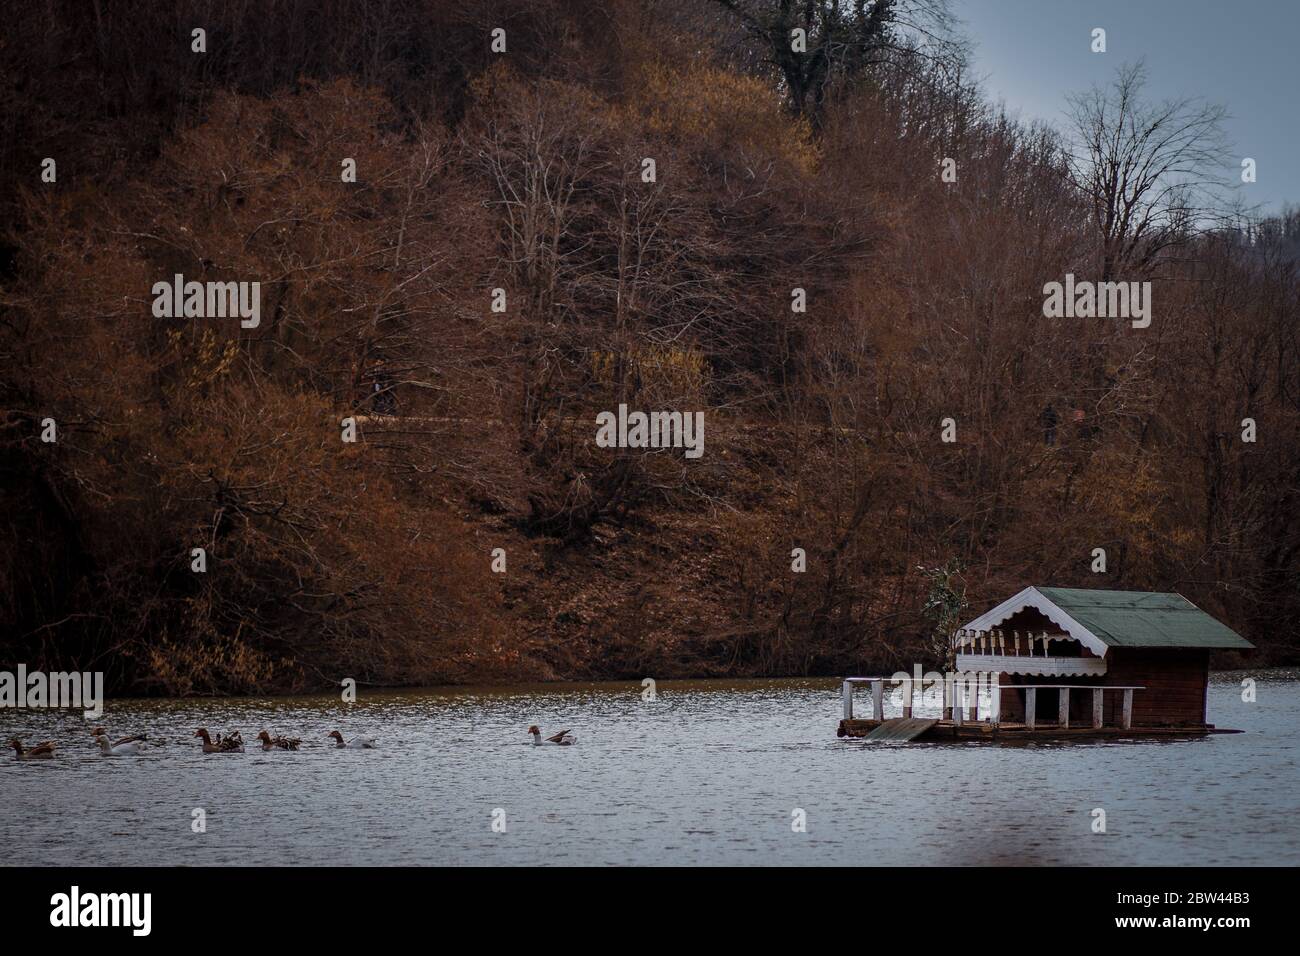 A small bird house on the lake. ducks and little wooden bird house on the lake. Stock Photo